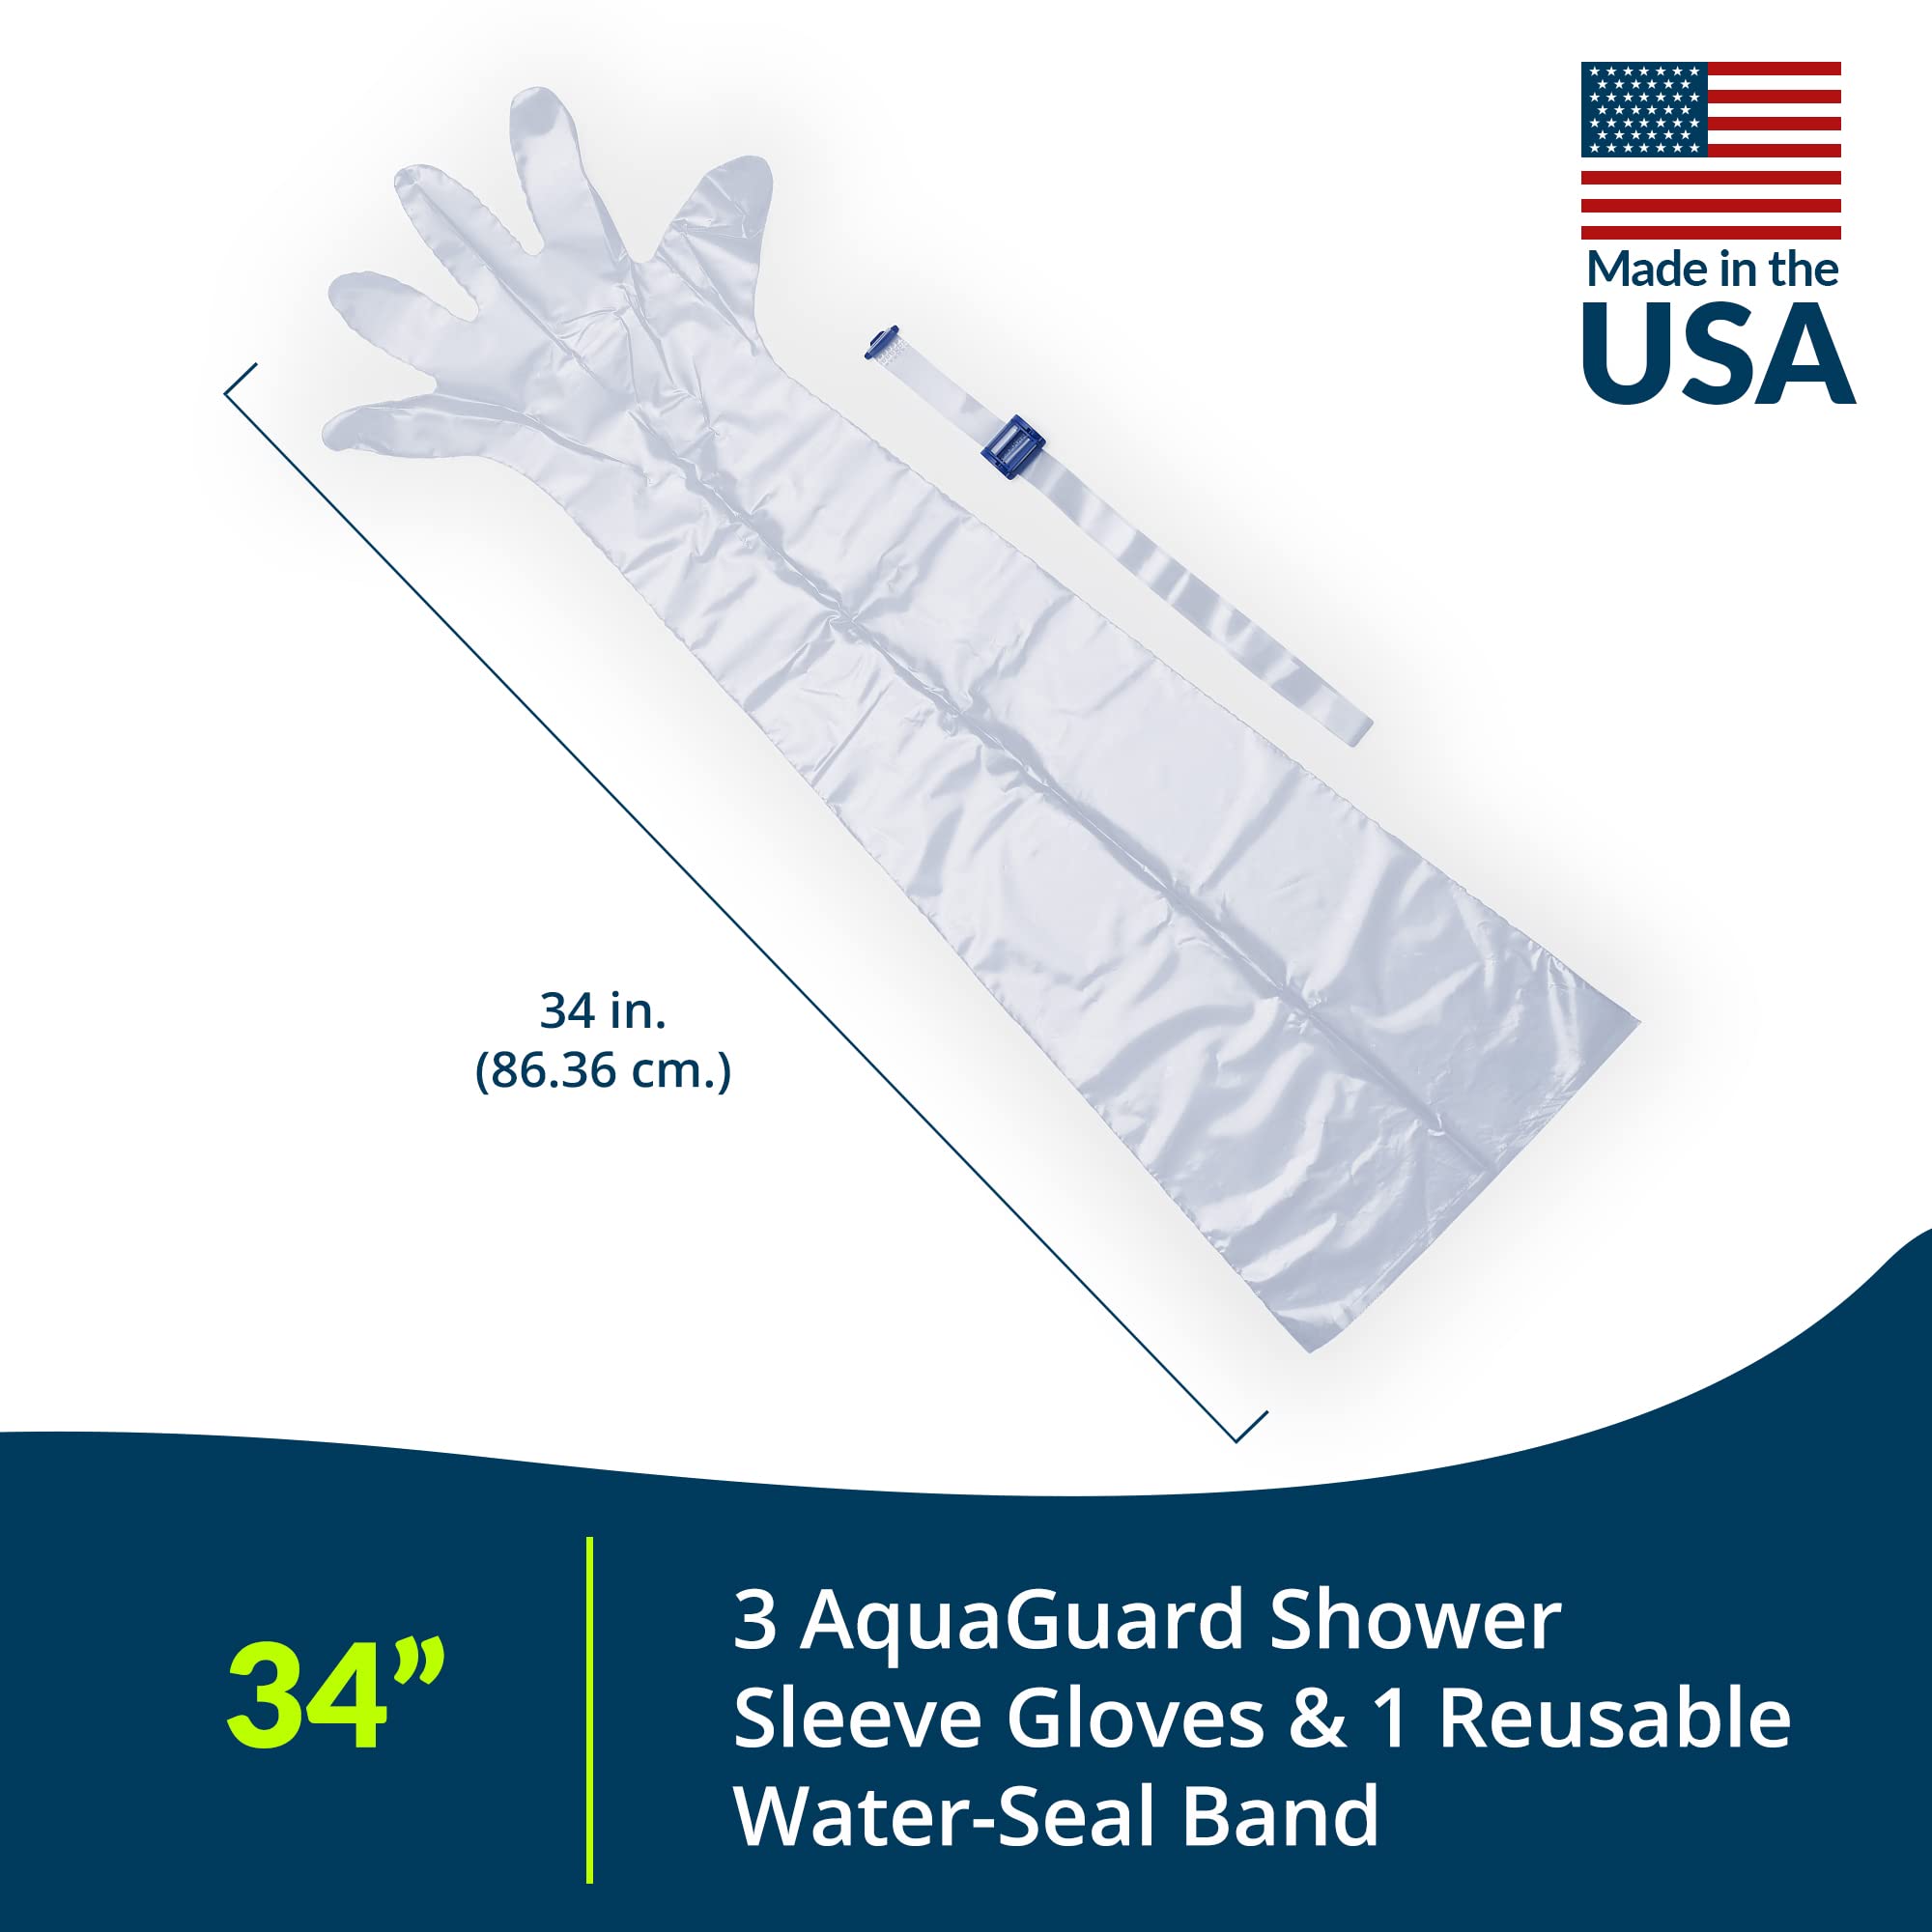 TIDI AquaGuard Glove – Shower Protection Glove with Water-Seal Band – Arm Cast Cover – 3 Gloves and 1 Water-Seal Band per Package – Home Medical Supplies (50016-RPK)